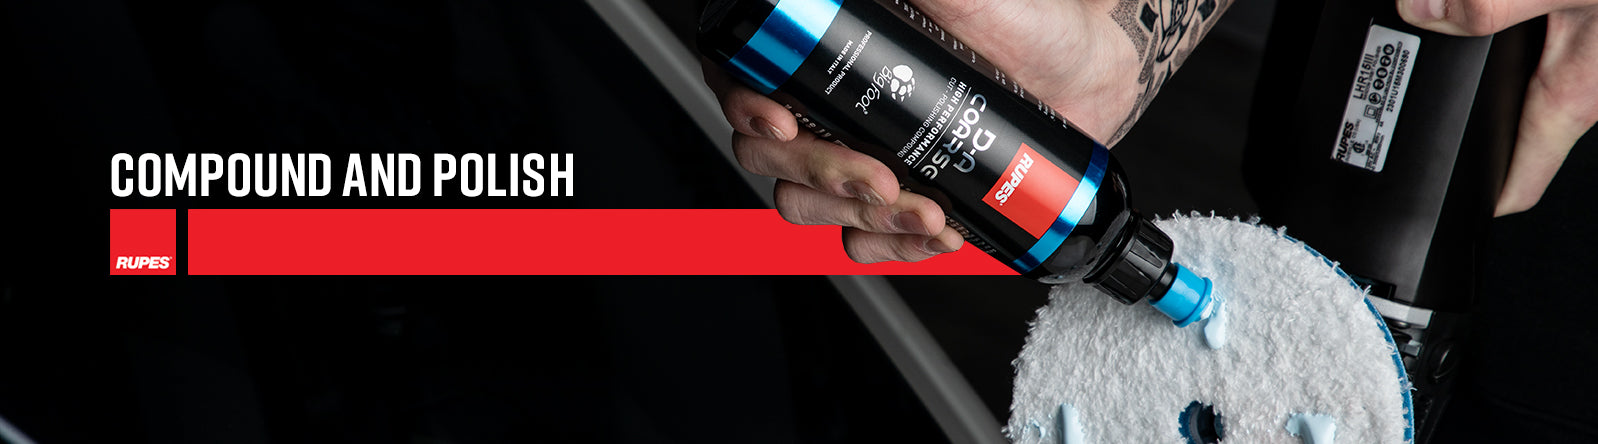 Rupes Products - Compound and Polish